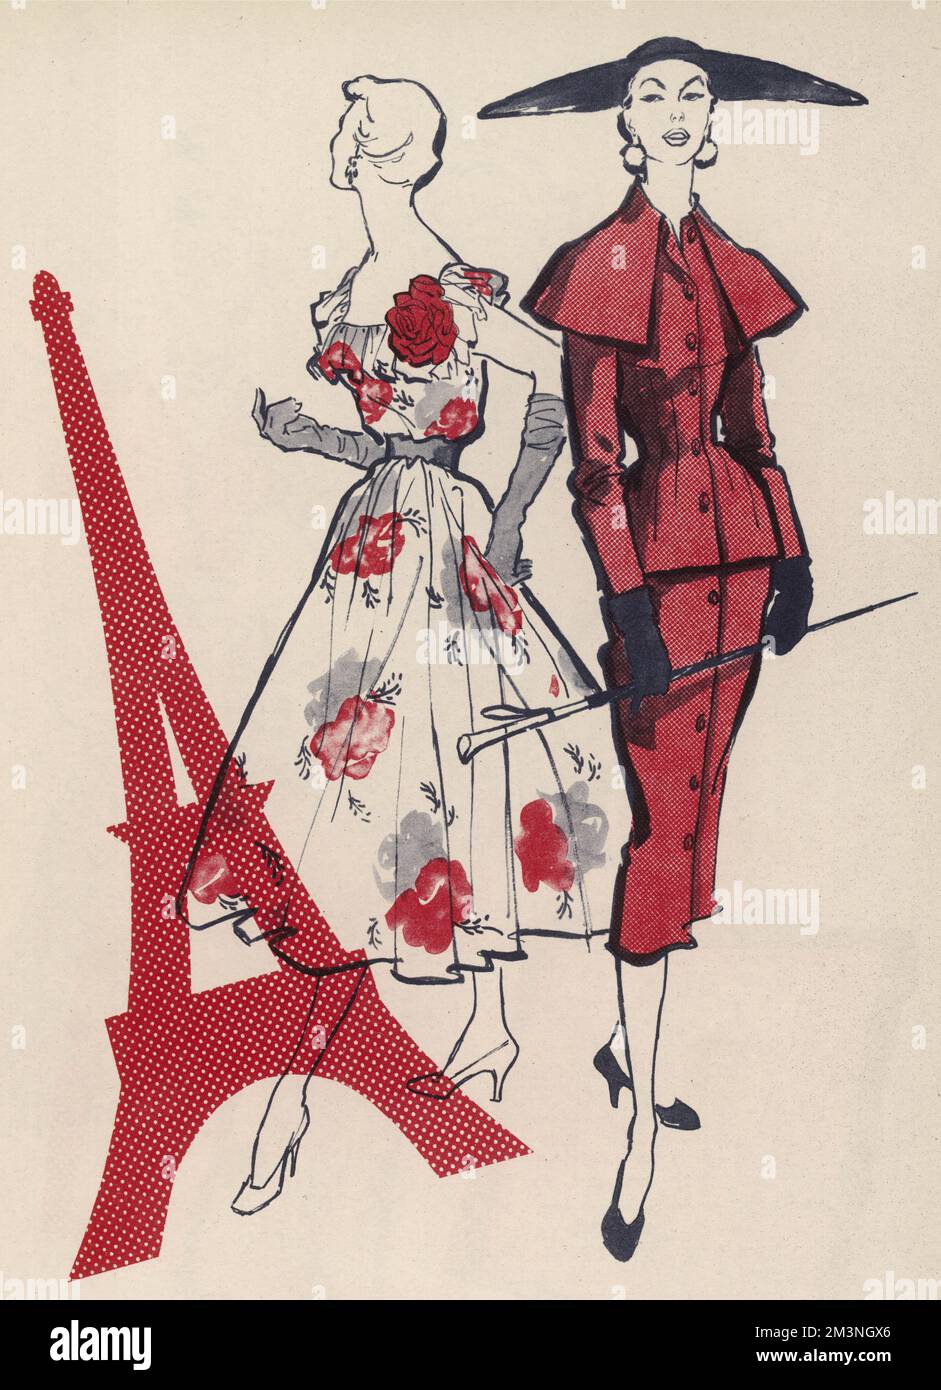 A dress in diaphanous floral chiffon with a 3D rose at the shoulder and a leather belt at the waist by Christian Dior.  On the right is the braced silhouette of a tweed suit by Fath with vertical button line and cape giving it extra panache.       Date: 1954 Stock Photo